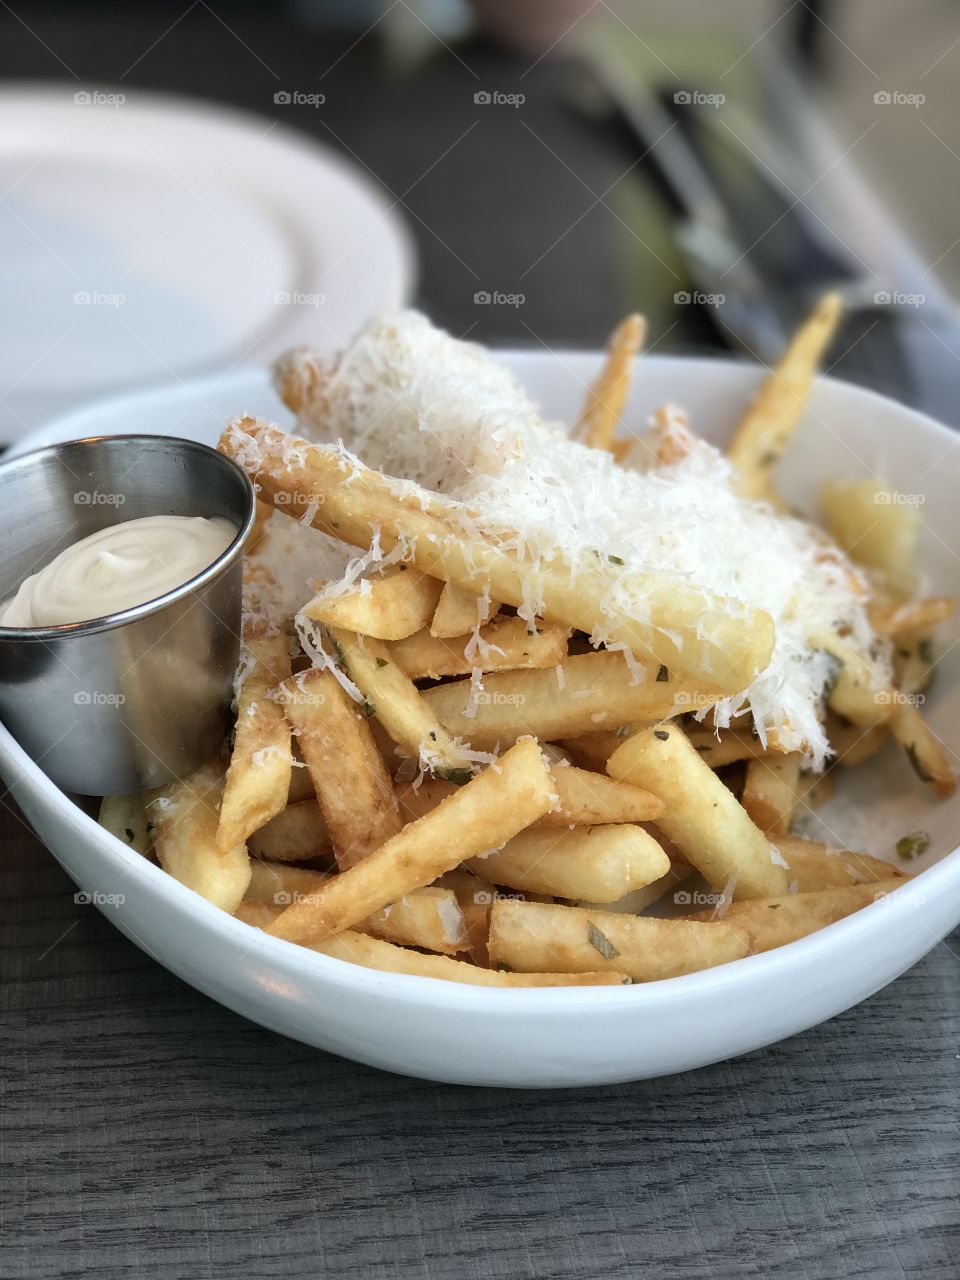 Crispy Truffle French fries with fresh grated parmesan and a herb mayo for dipping. 